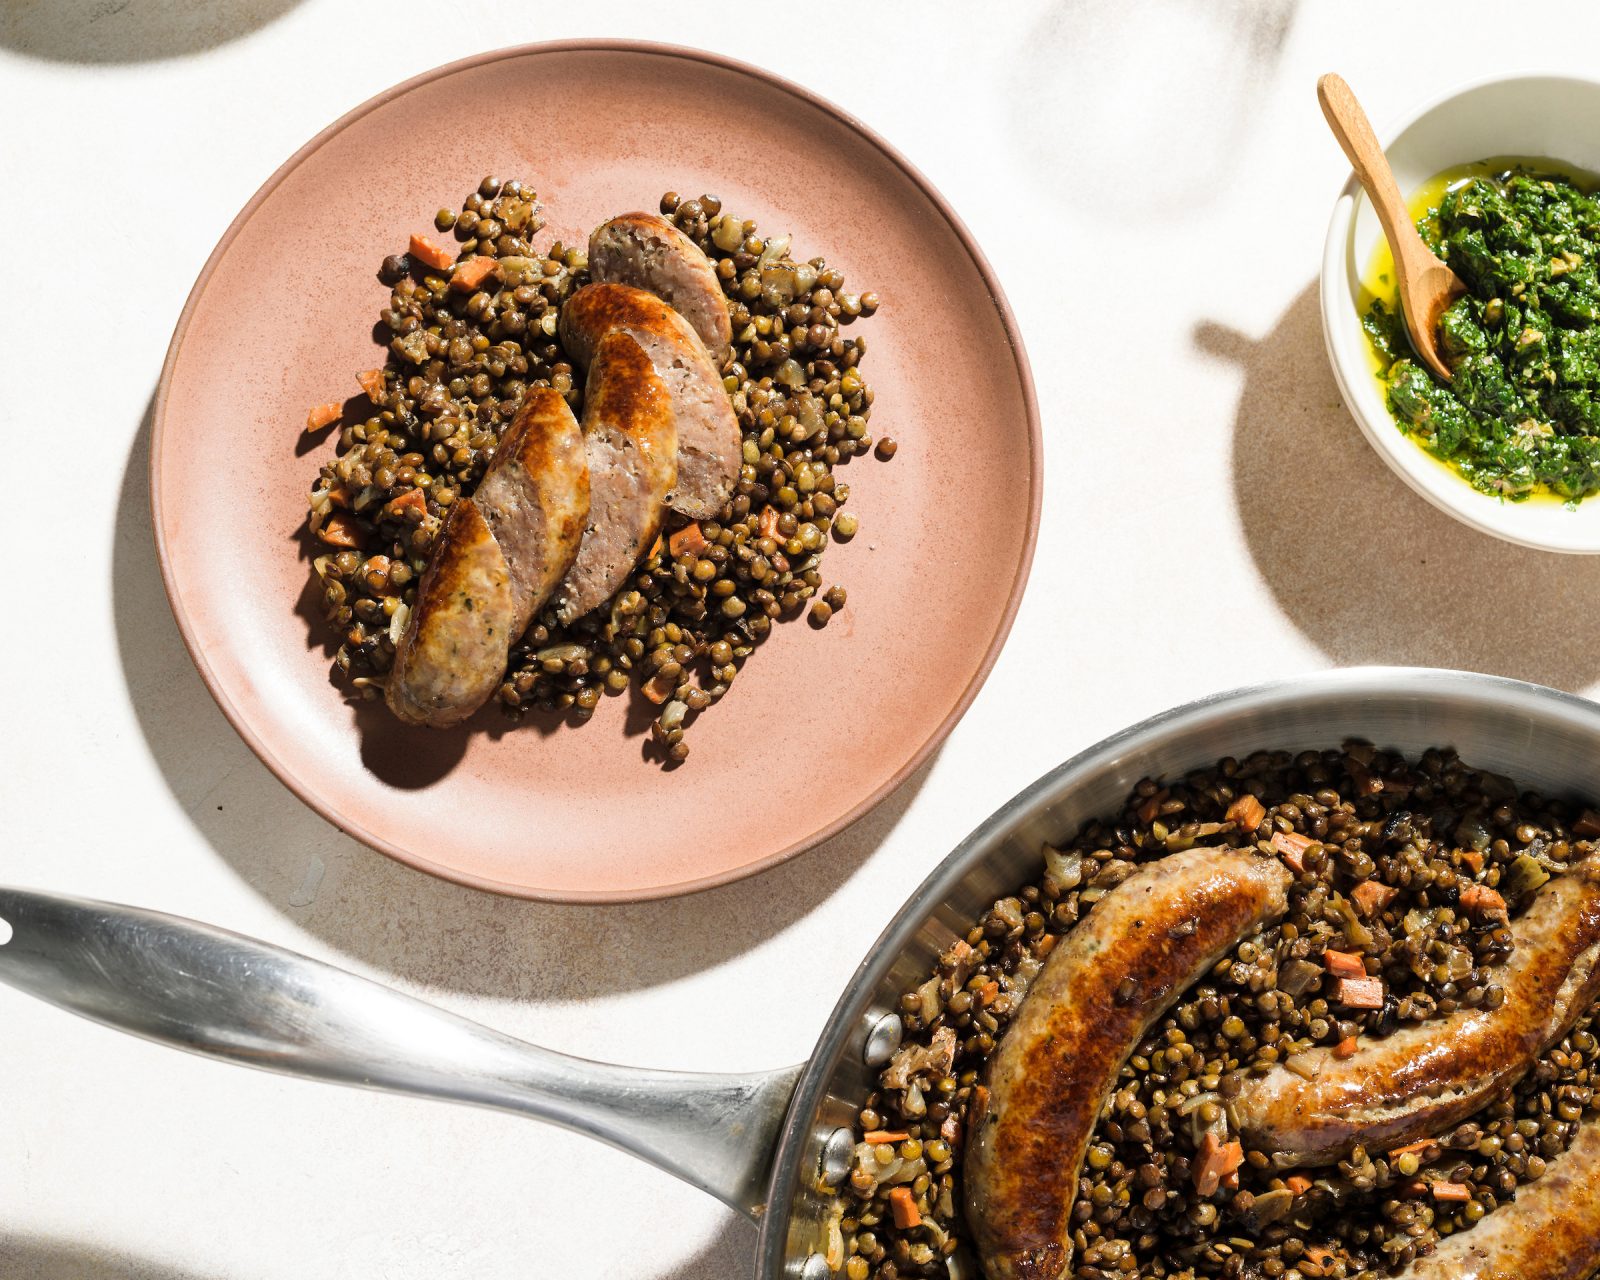 Braised Sausages and Lentils with Parsley-Caper Relish - Cook What You Have, Milk Street